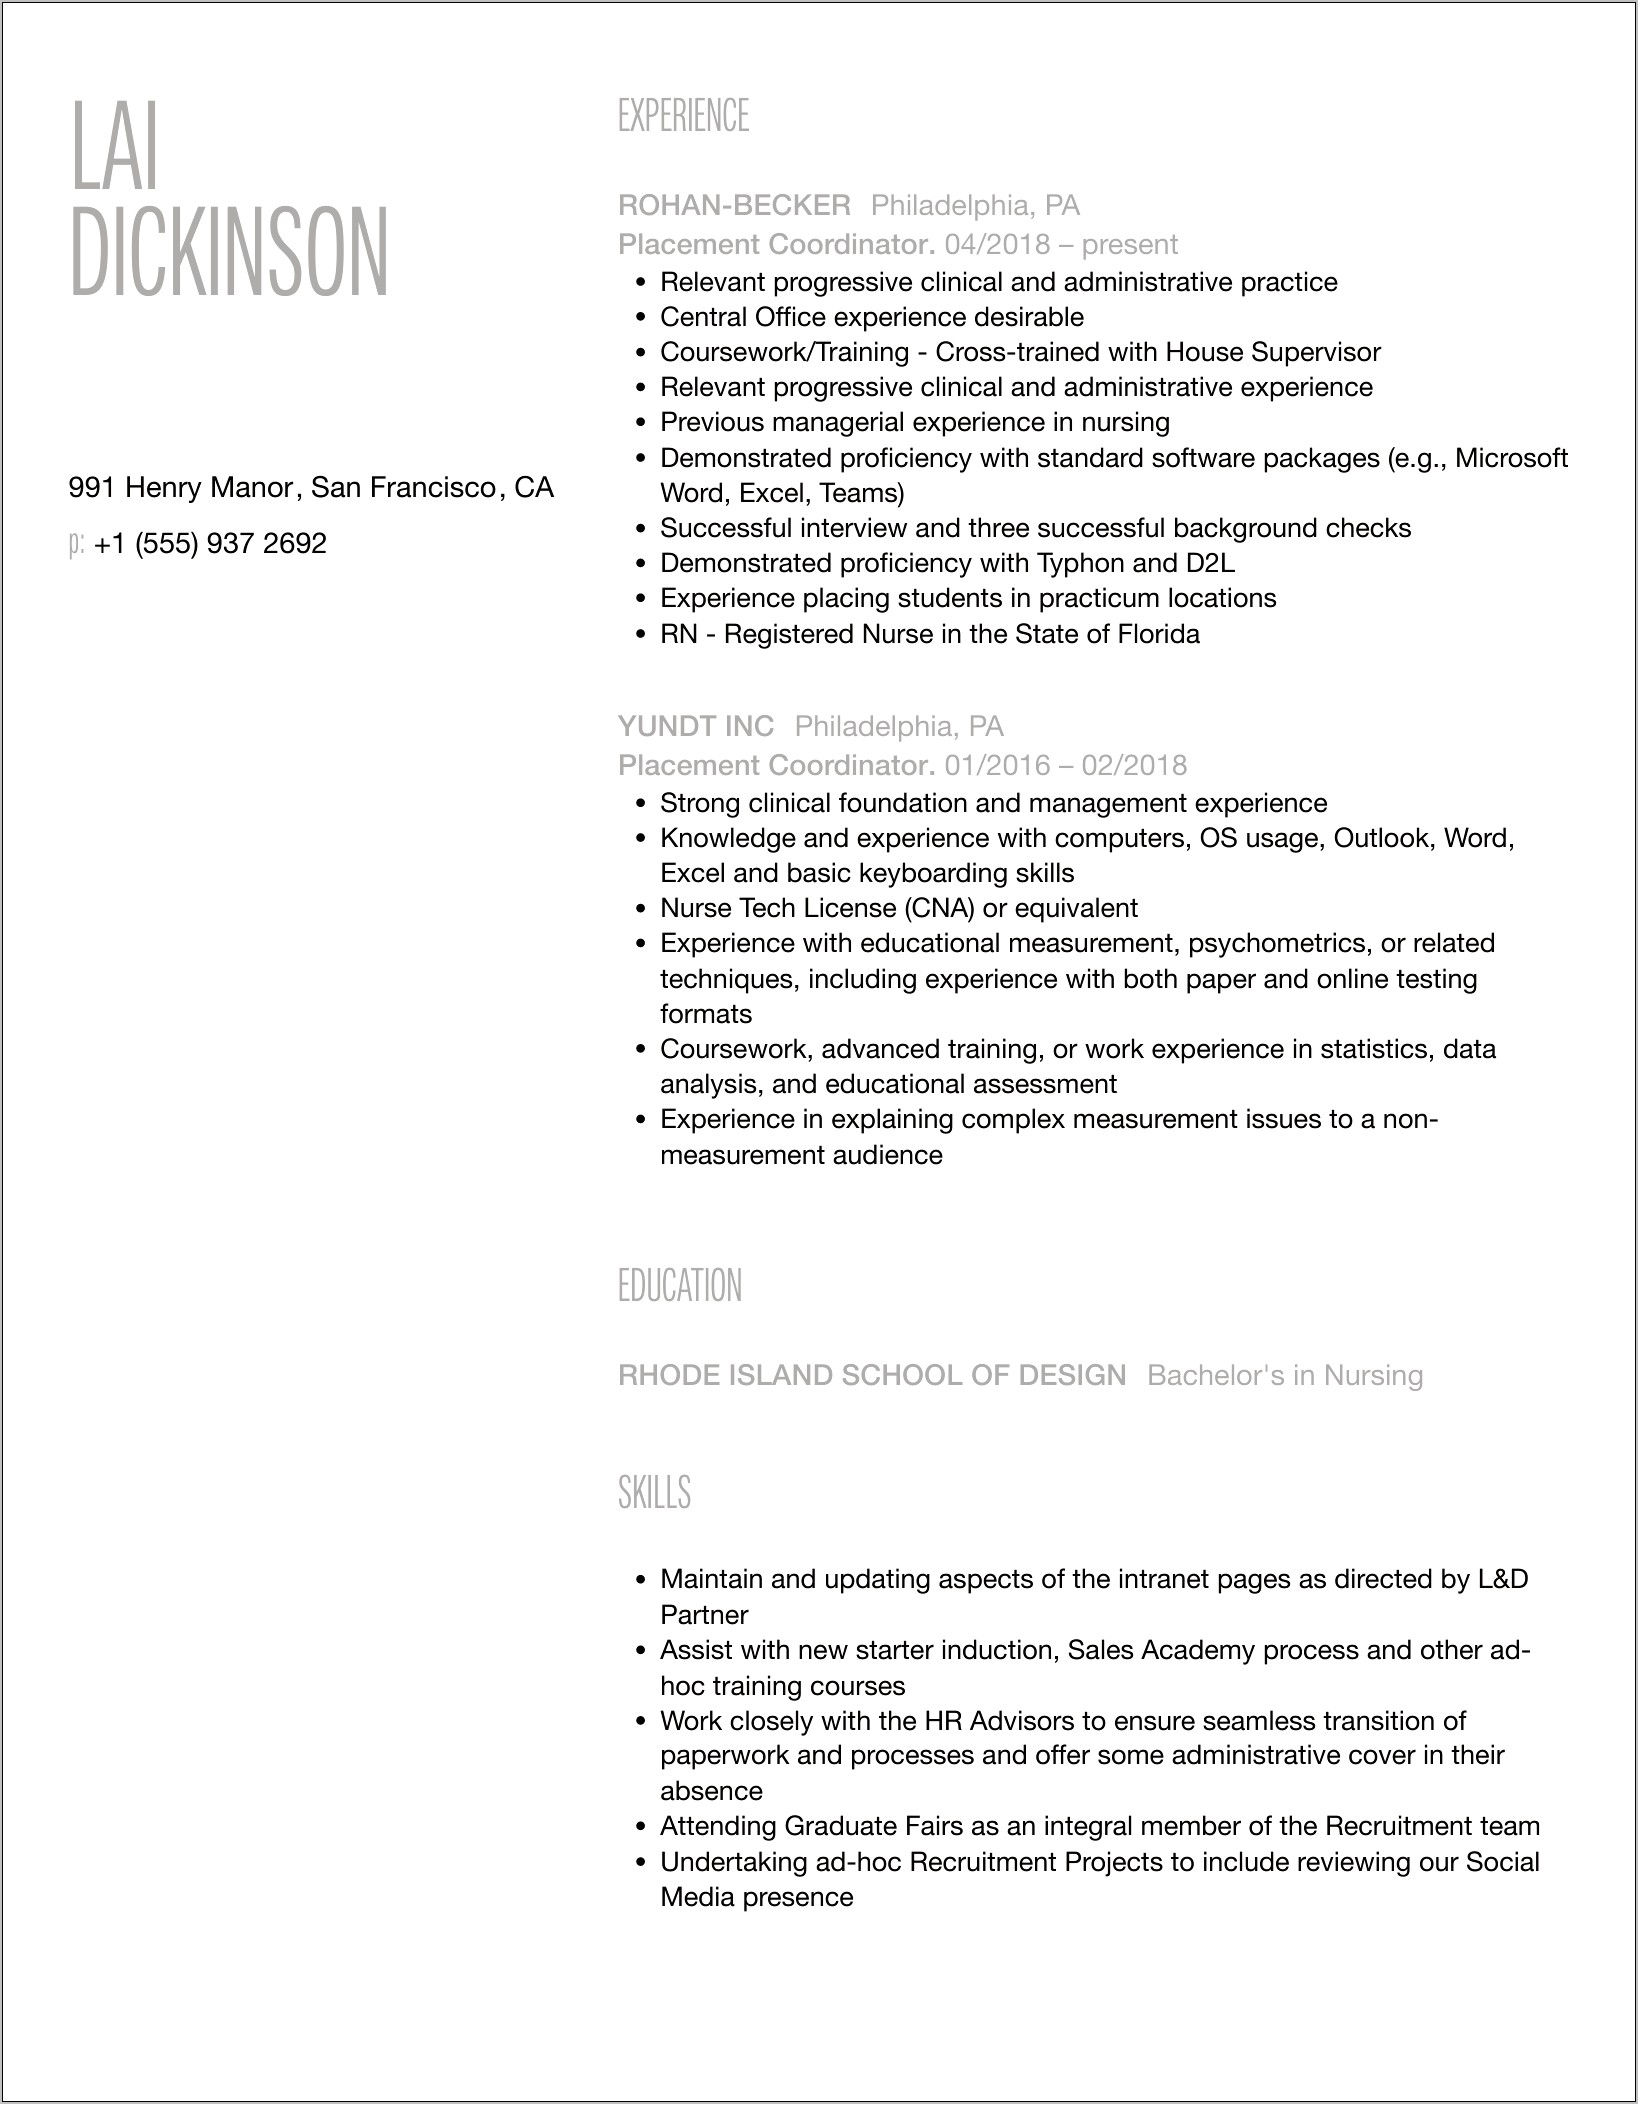 Sample Resume For Placement Coordinator